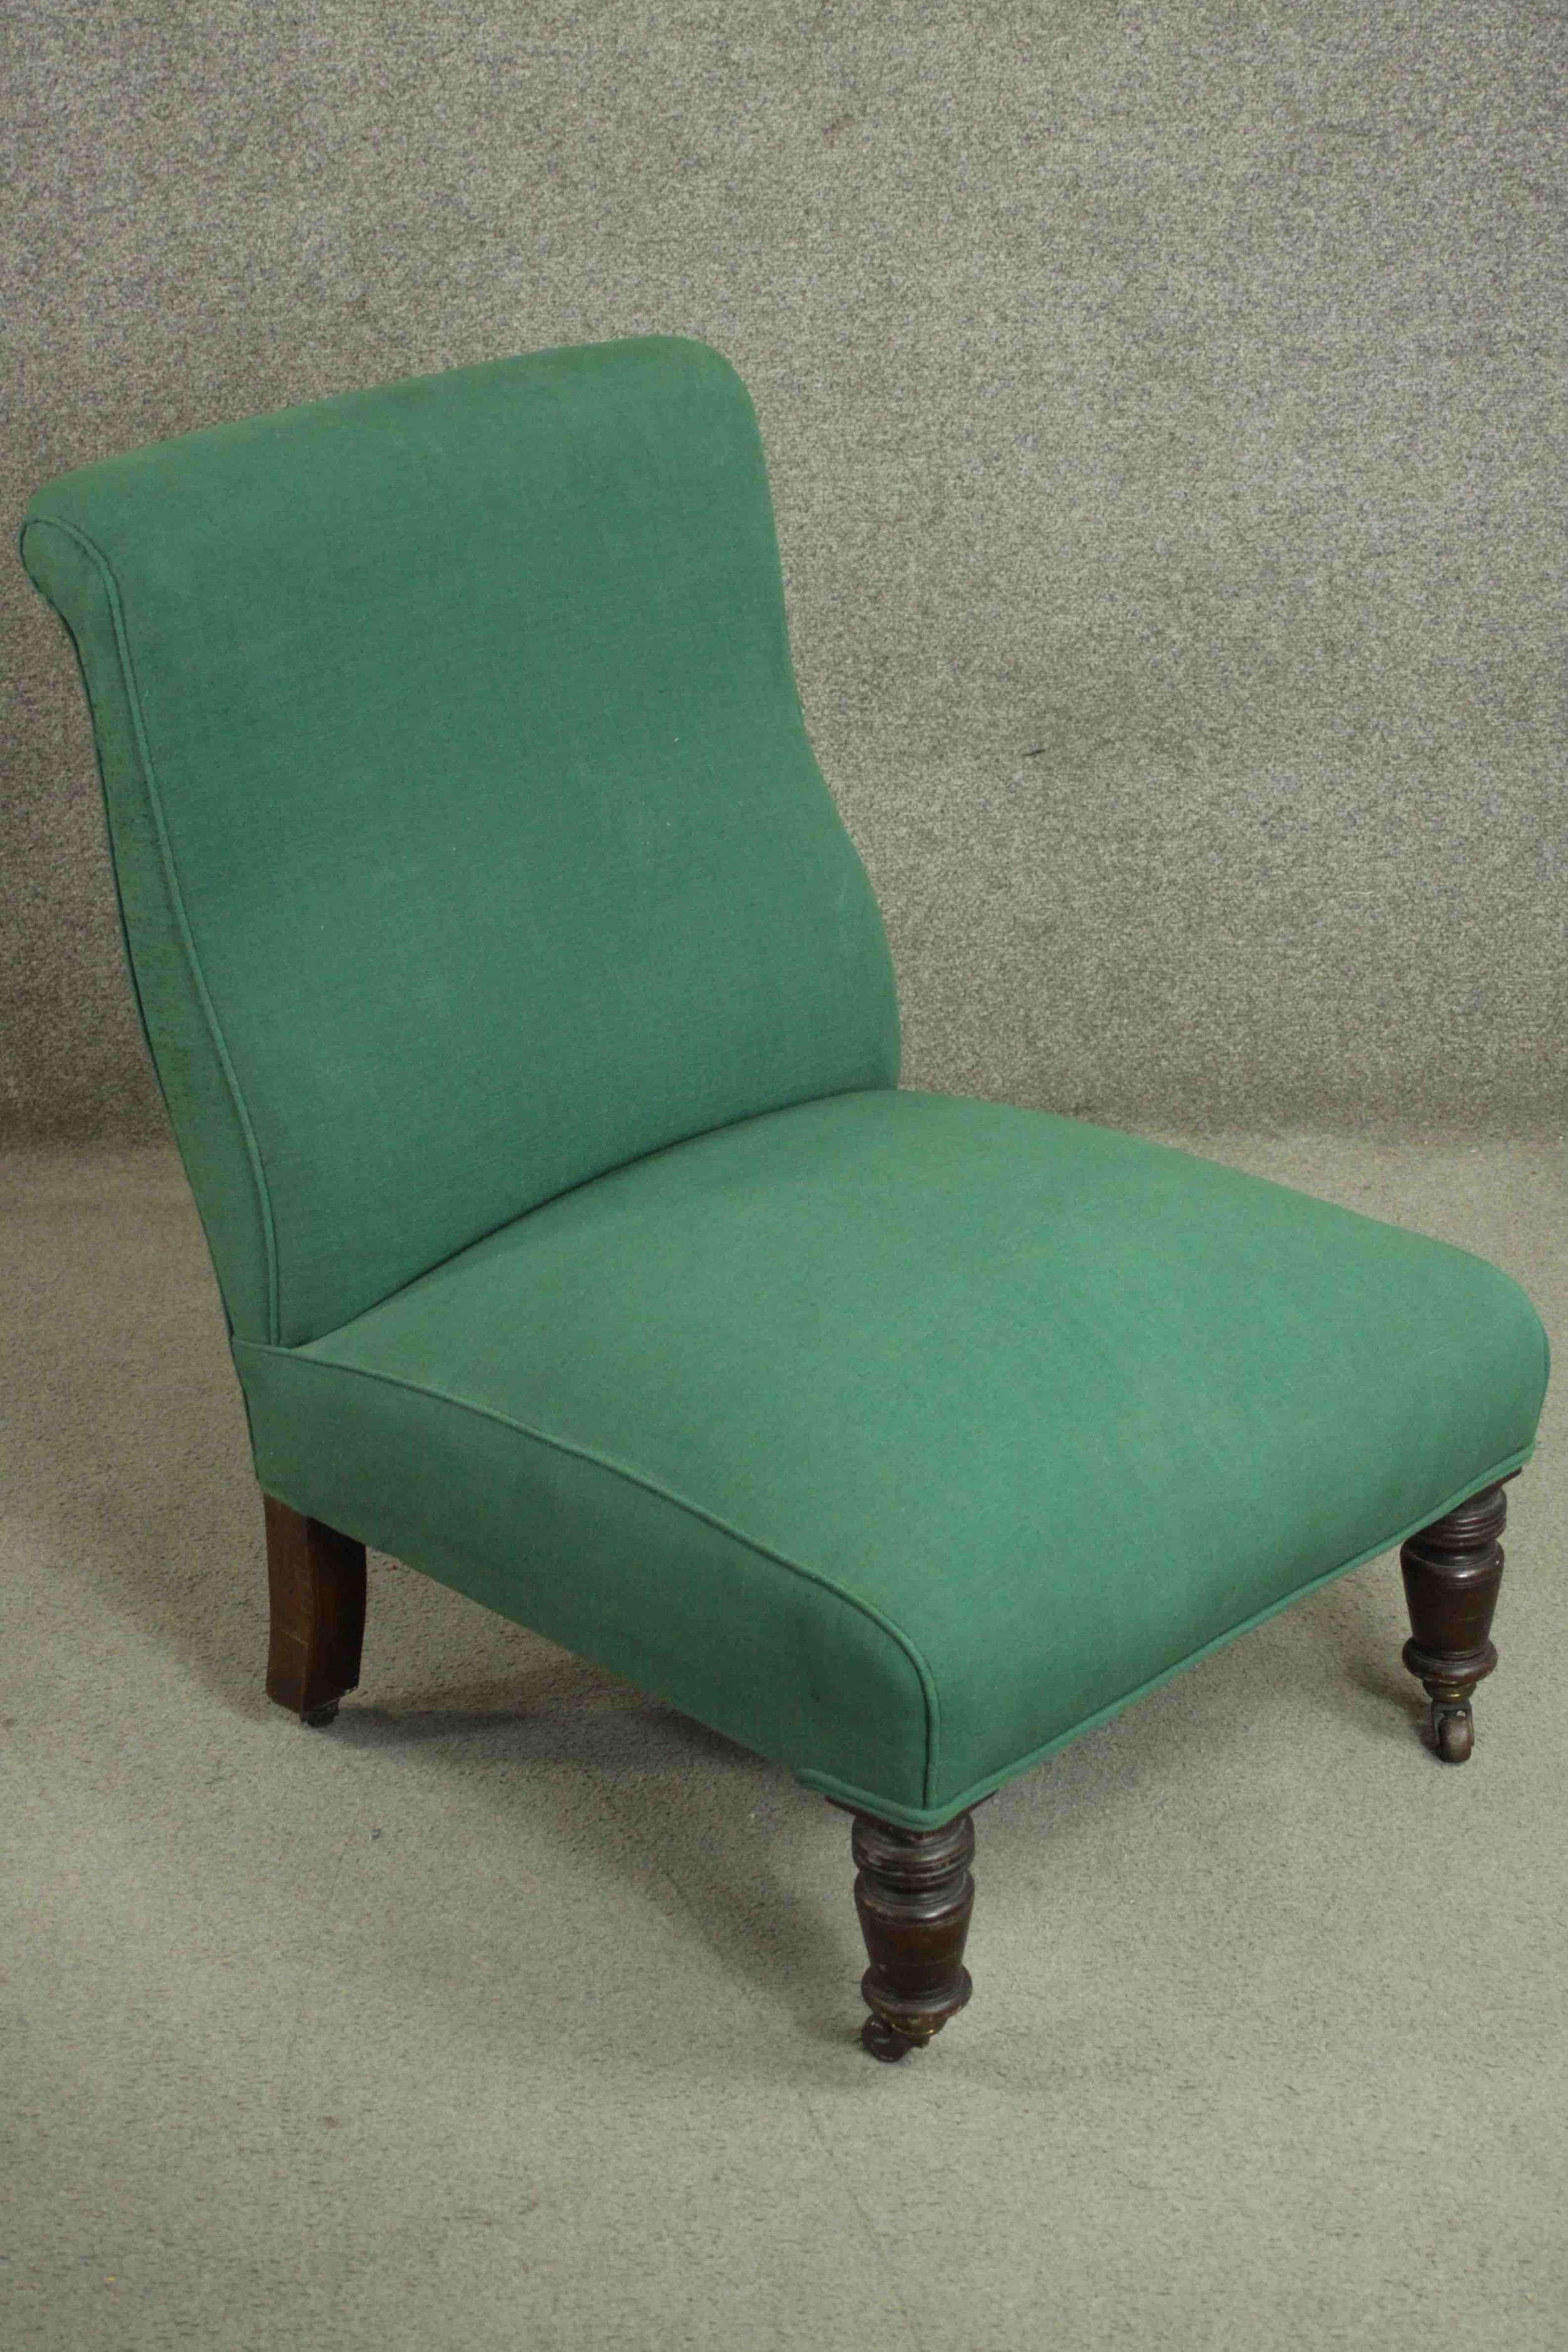 A Victorian mahogany nursing chair, upholstered in green fabric, on ring turned legs. H.85 W.61 D. - Image 2 of 5